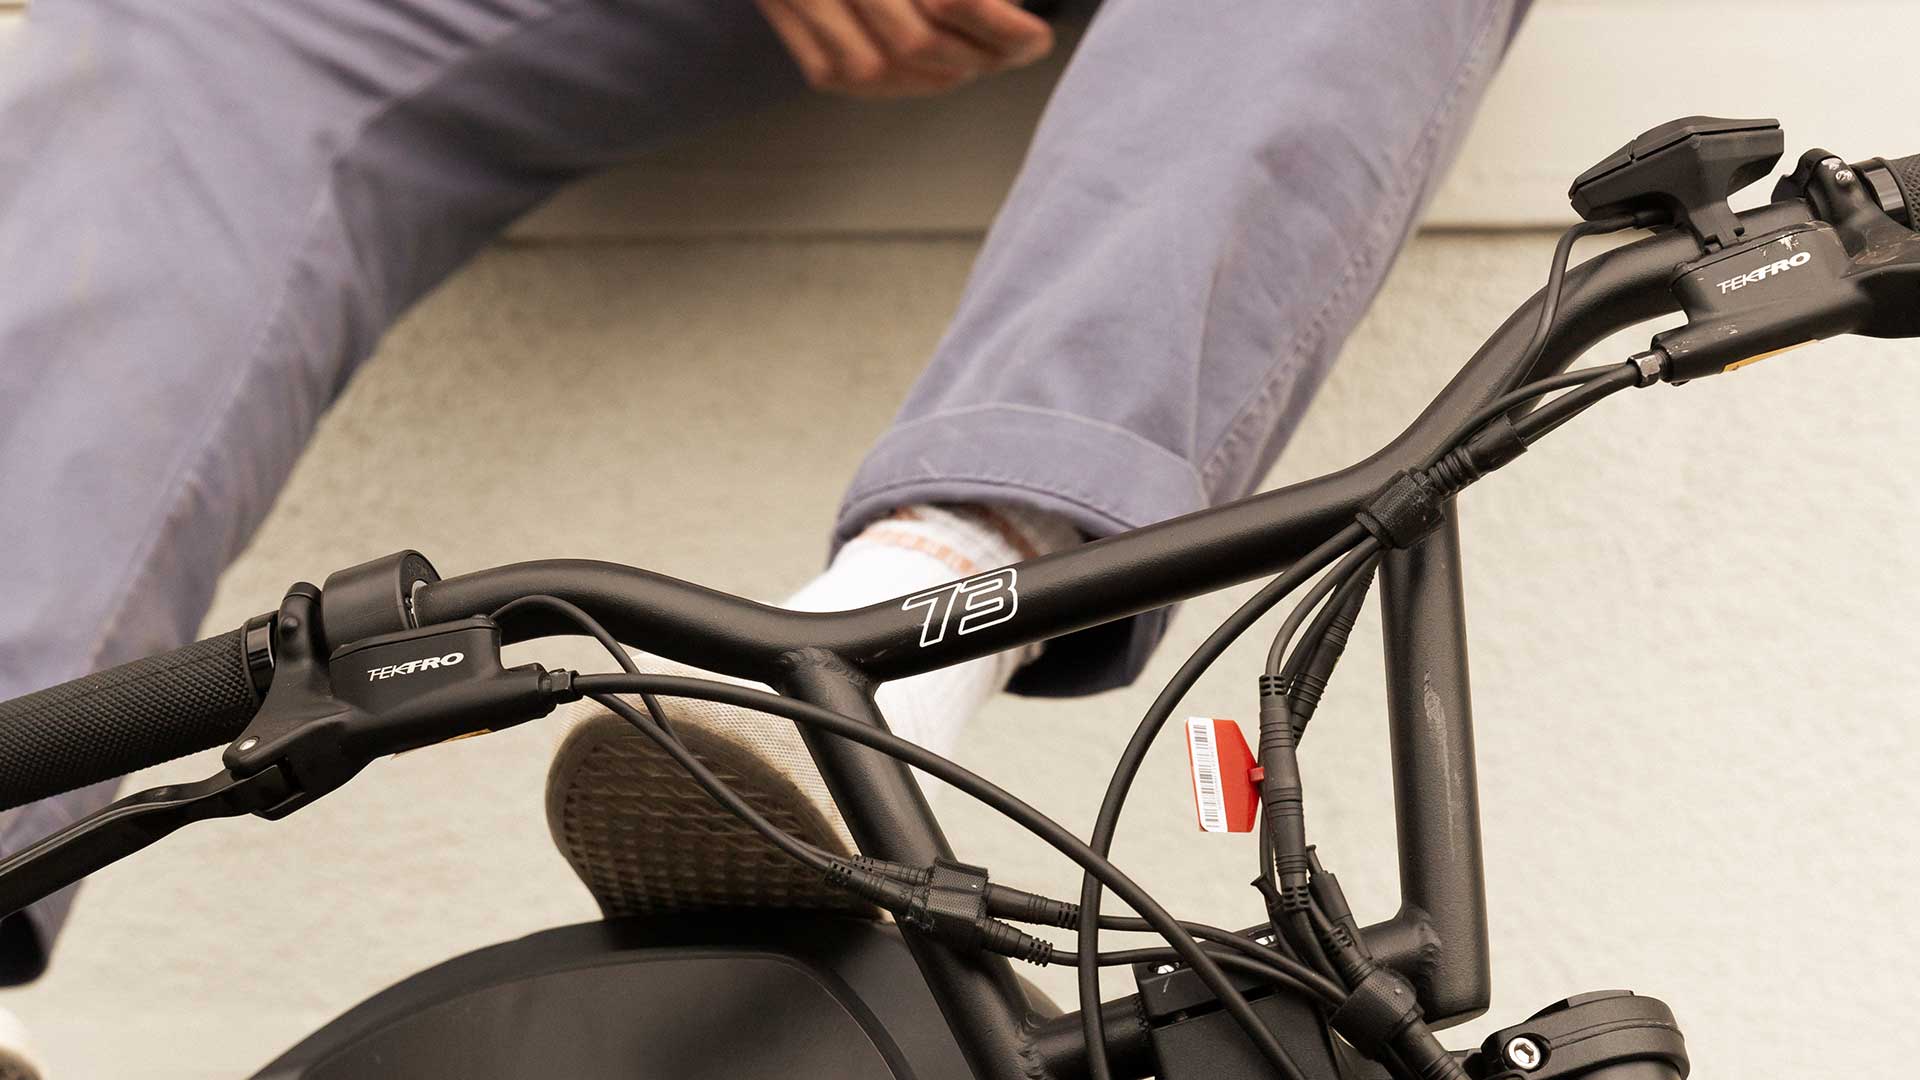 Closeup of the Super73 ebike handlebars where the smart display controller is located